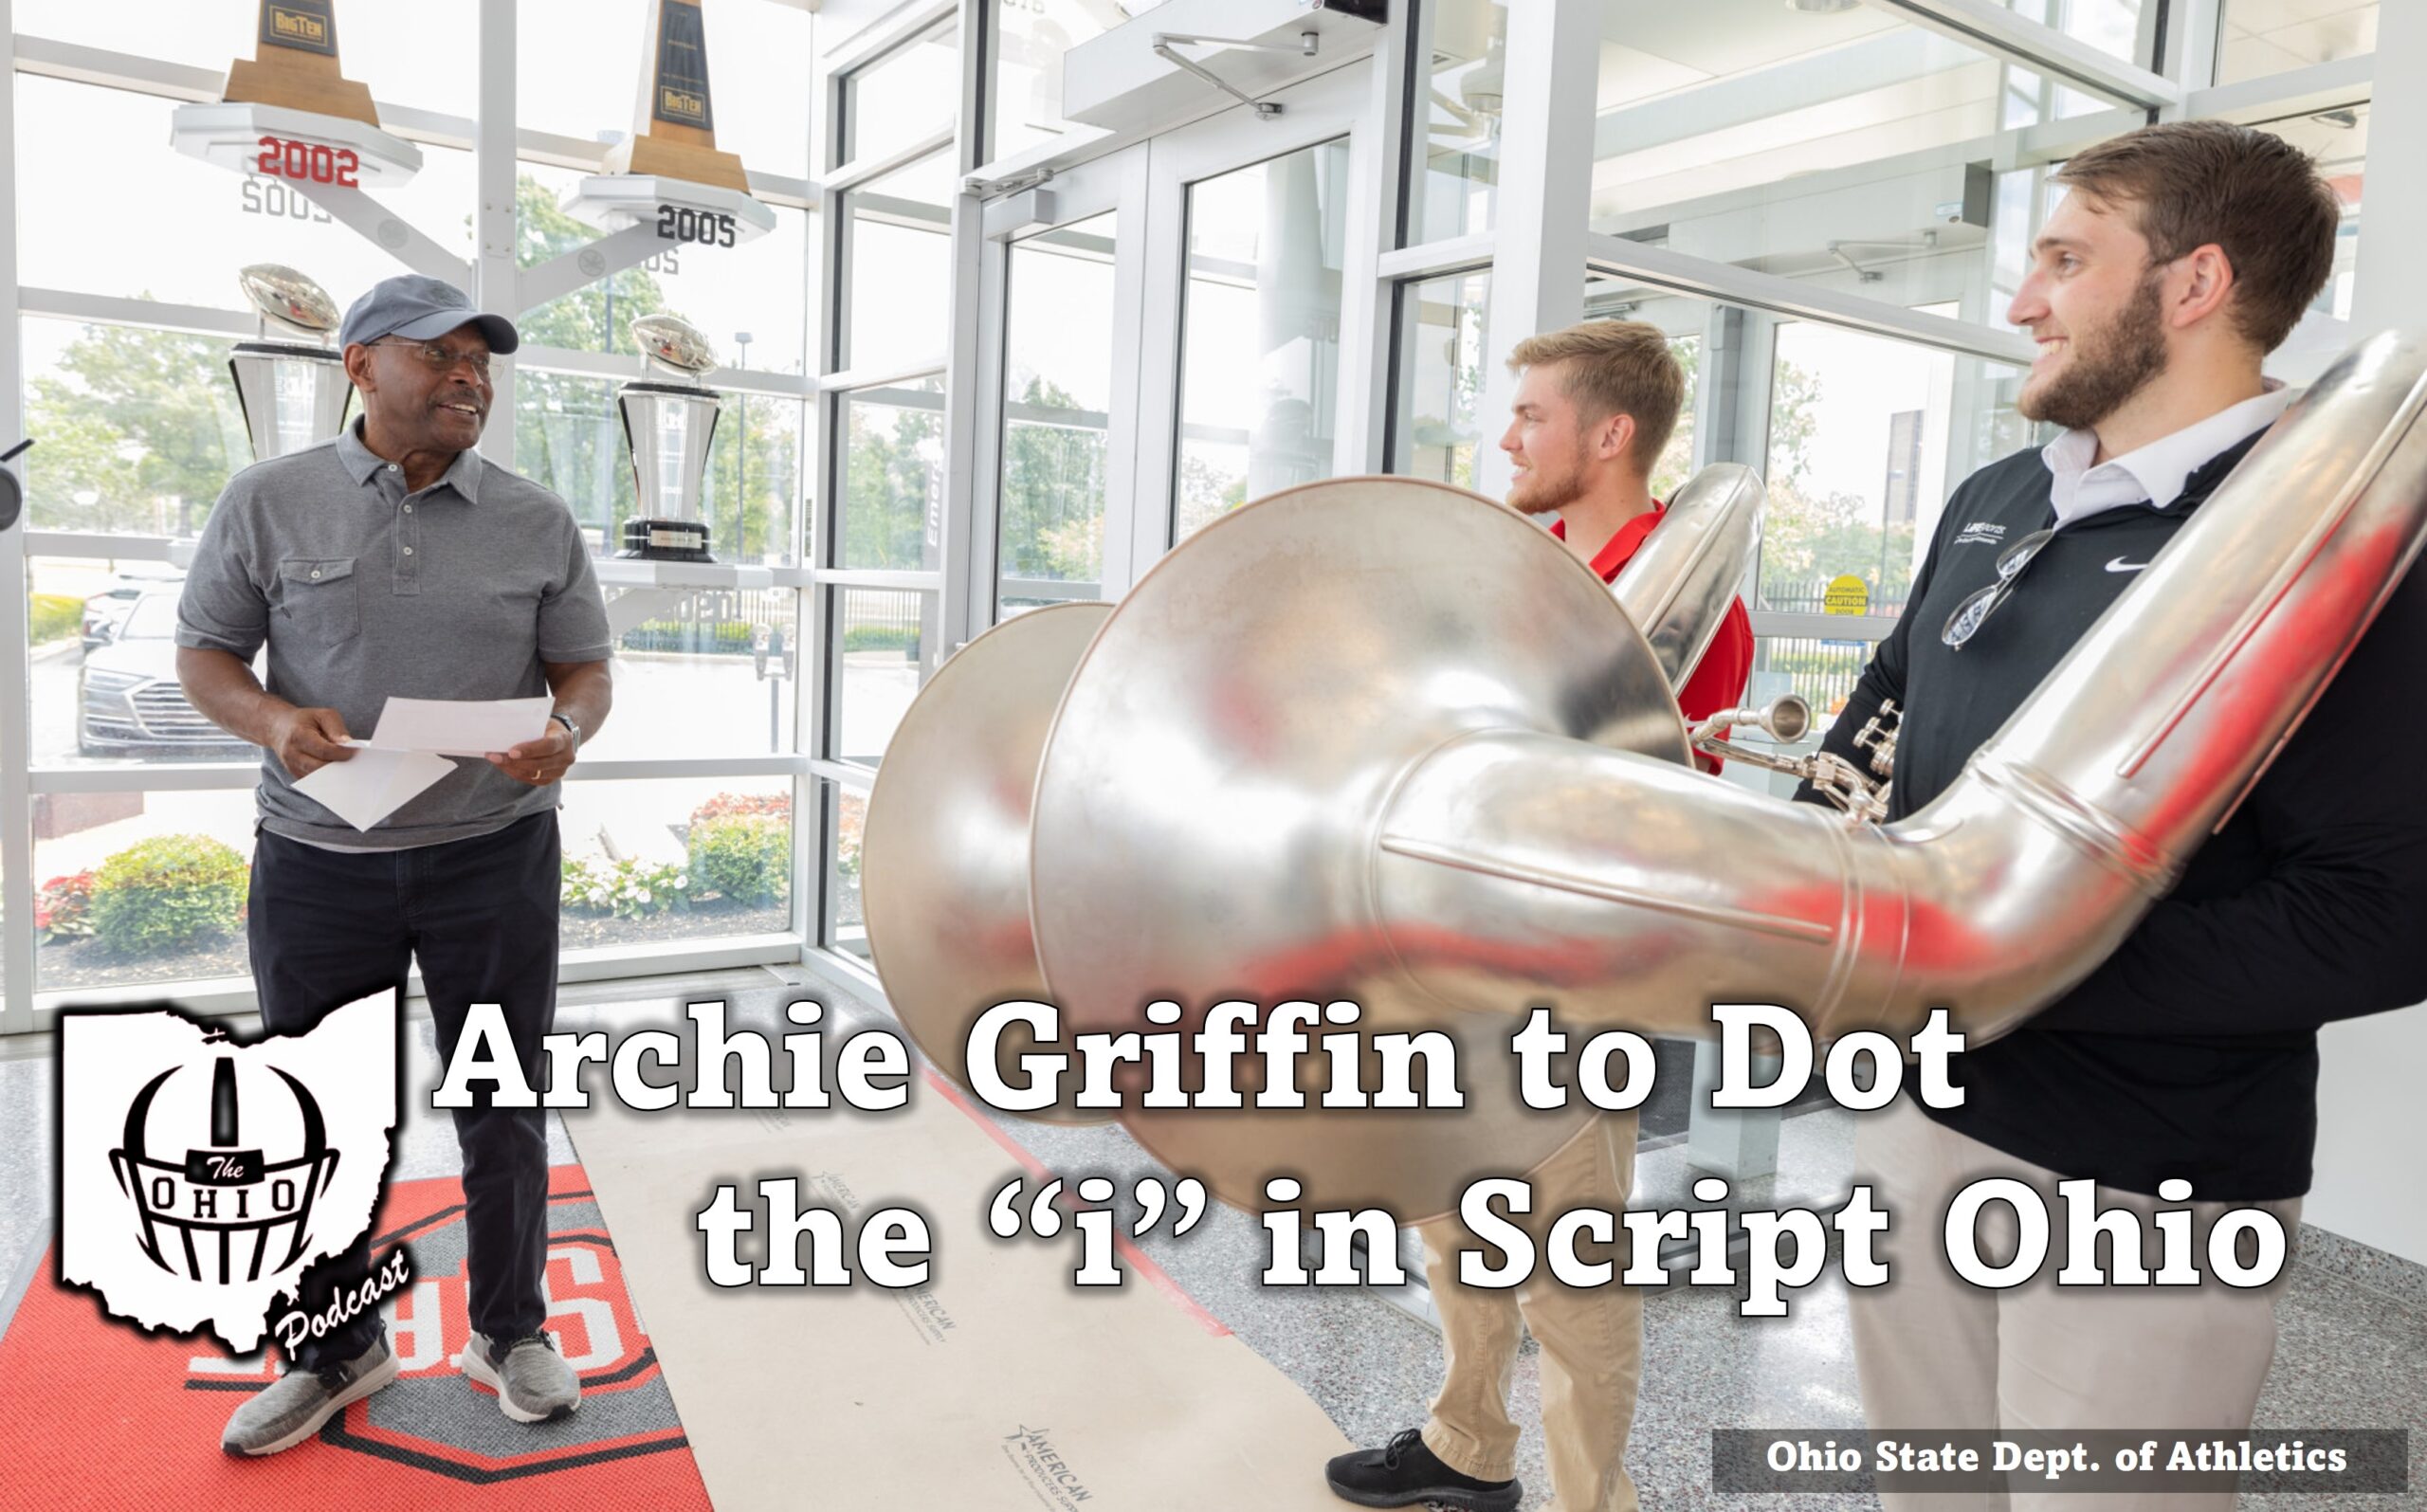 Archie Griffin to Dot the “i” in Script Ohio on August 31